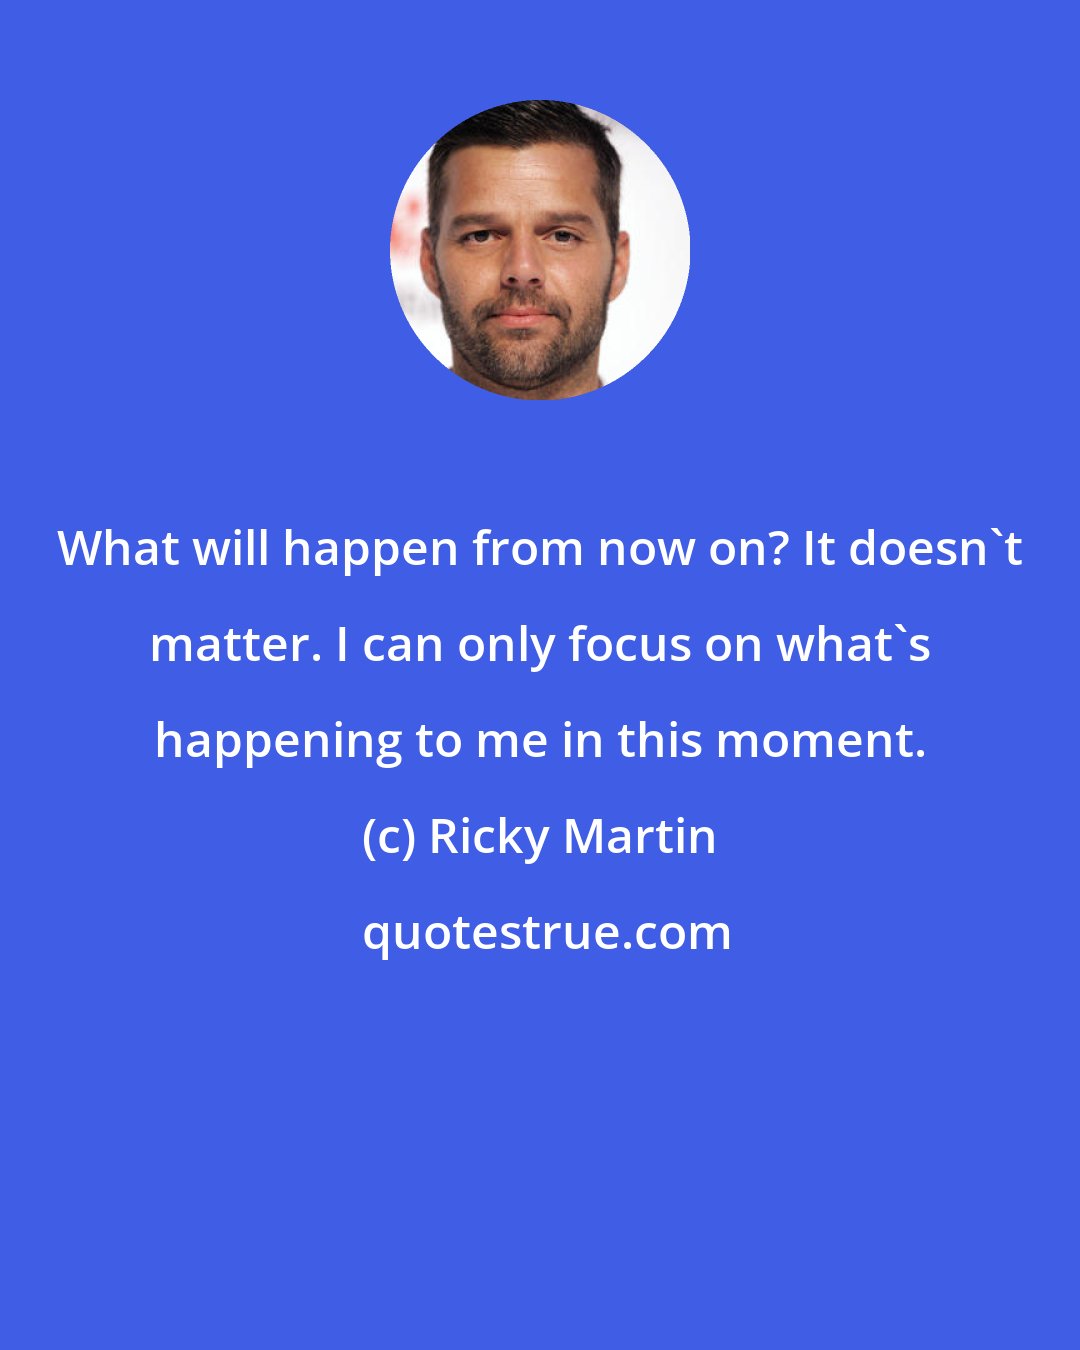 Ricky Martin: What will happen from now on? It doesn't matter. I can only focus on what's happening to me in this moment.